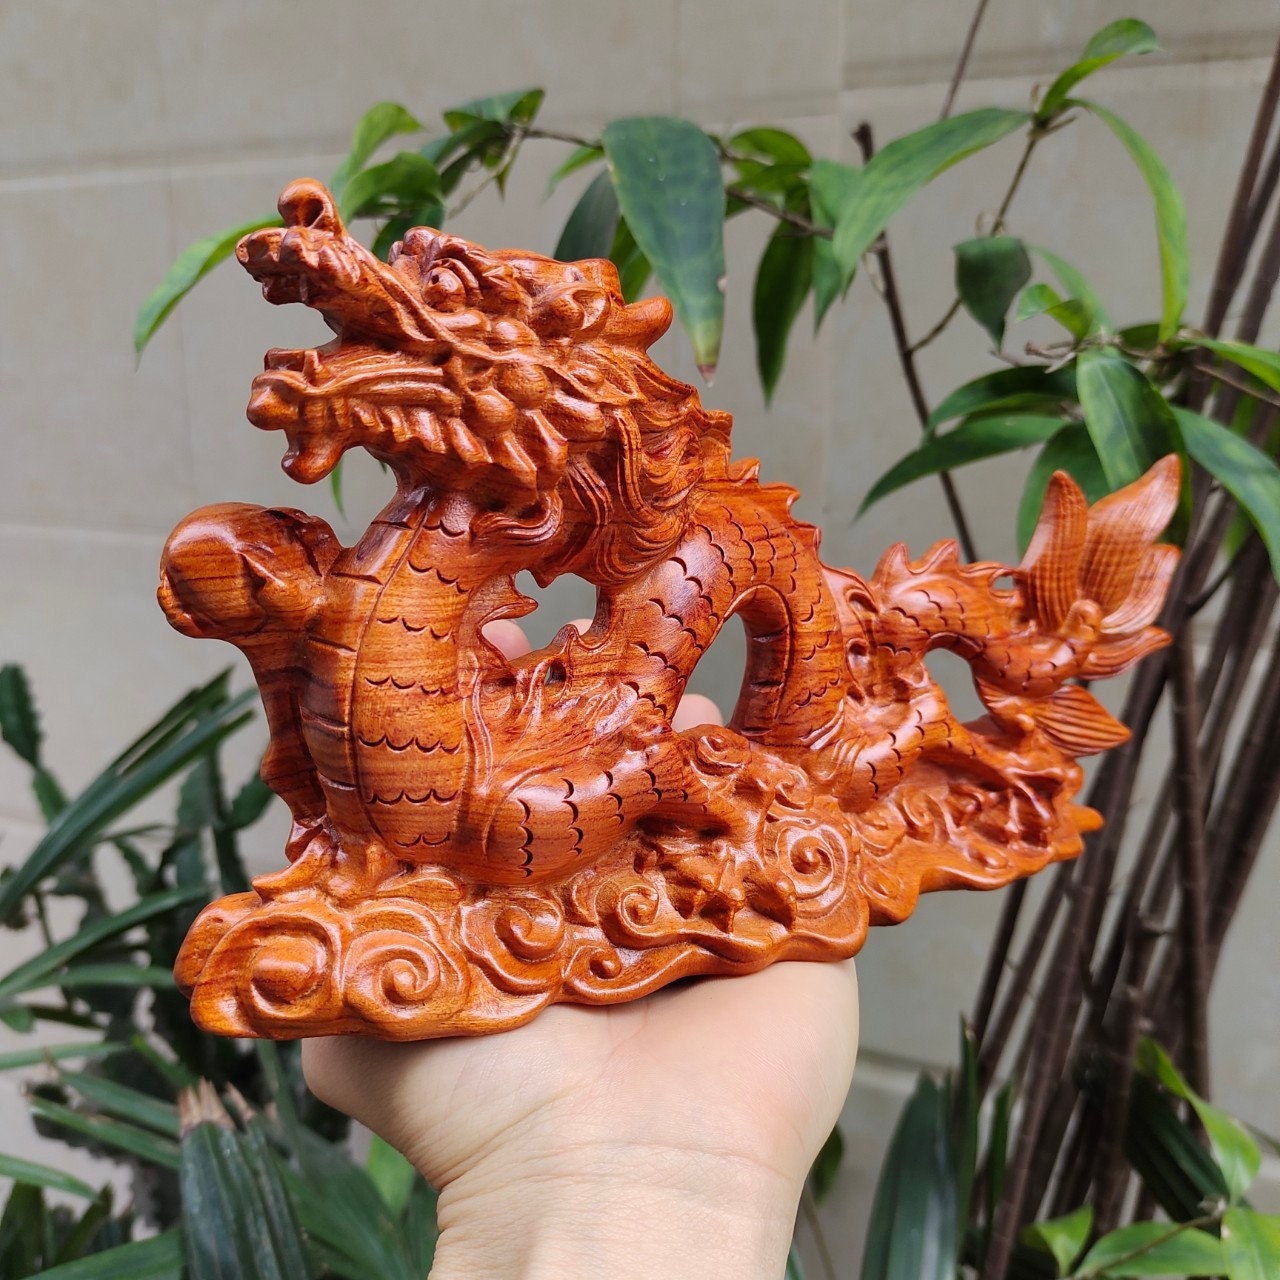 Wooden Dragon Statue New Year Figurine Chinese Fengshui